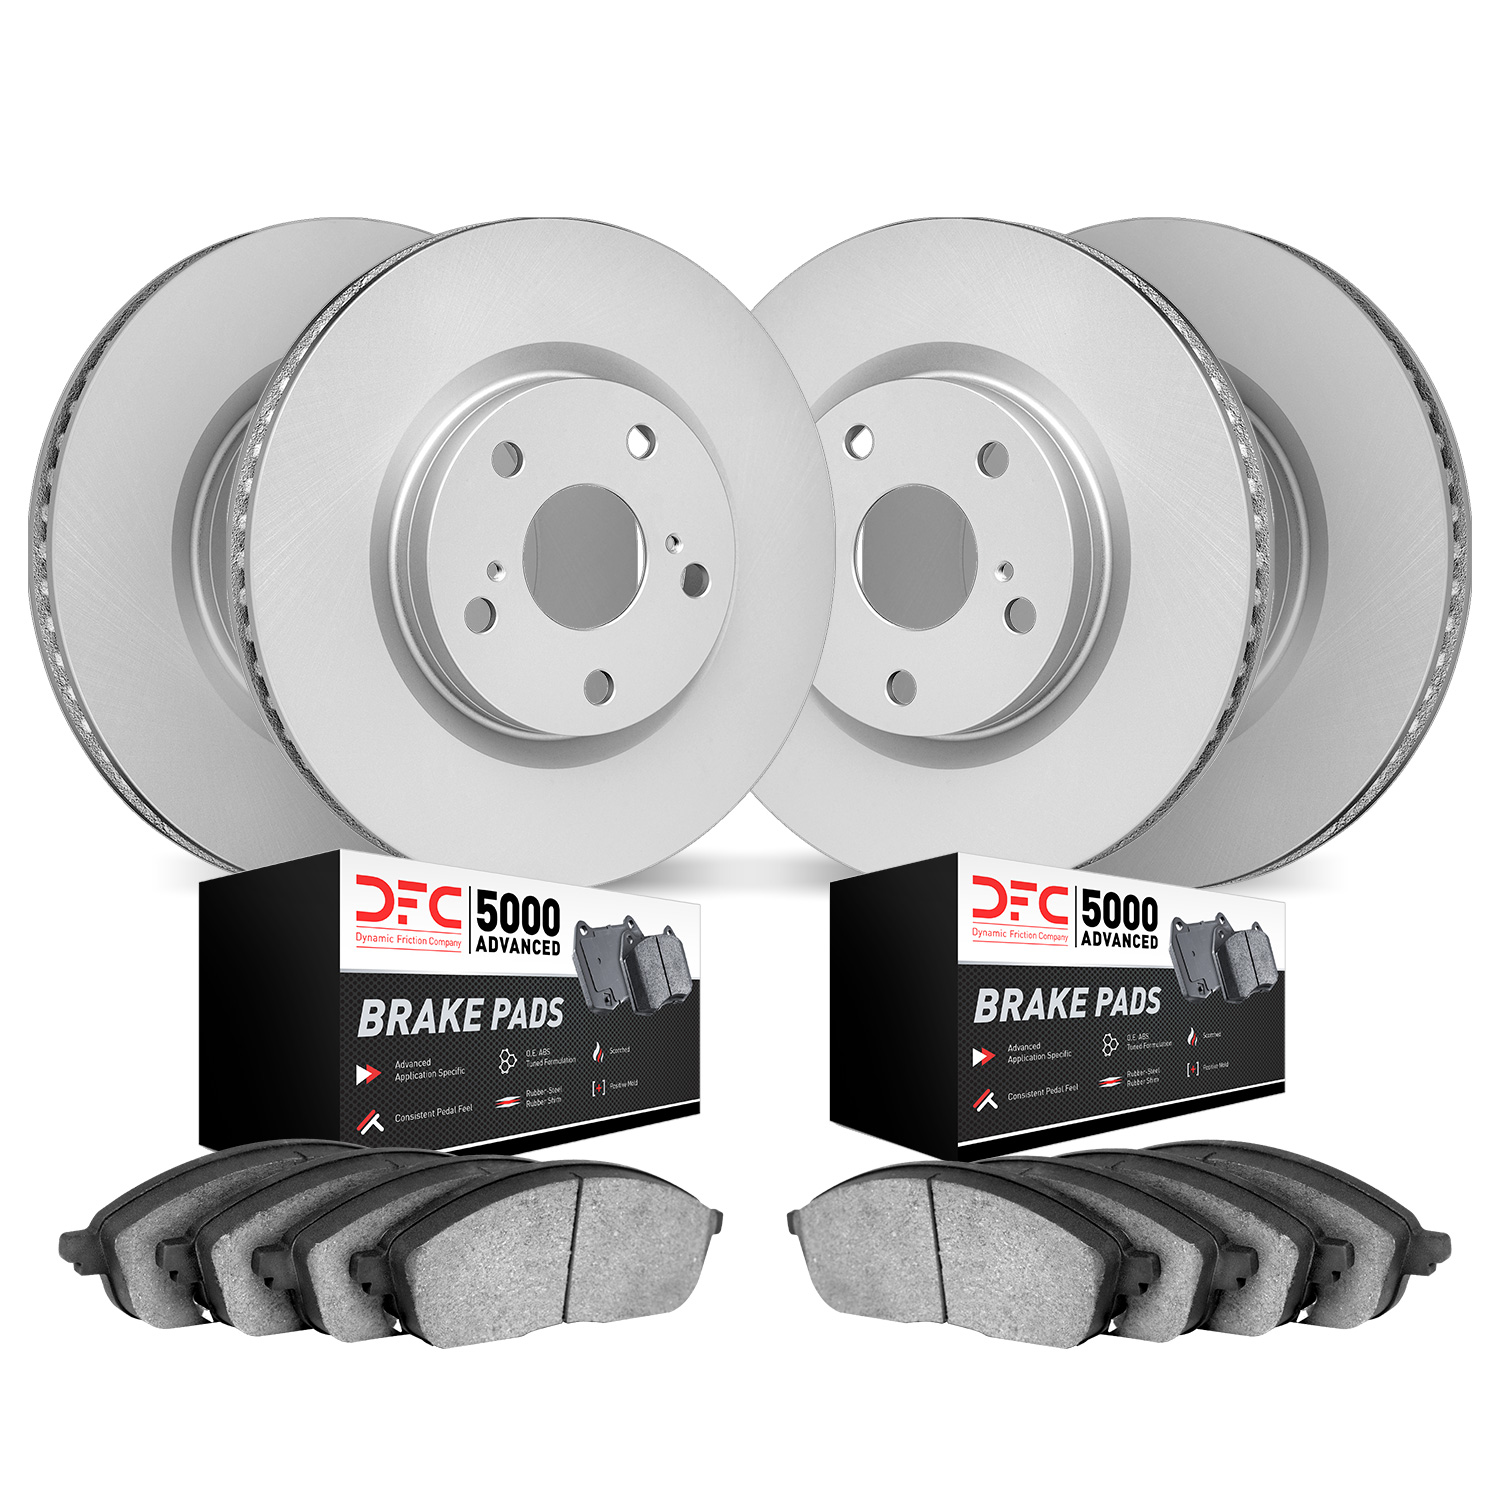 4504-54301 Geospec Brake Rotors w/5000 Advanced Brake Pads Kit, Fits Select Ford/Lincoln/Mercury/Mazda, Position: Front and Rear